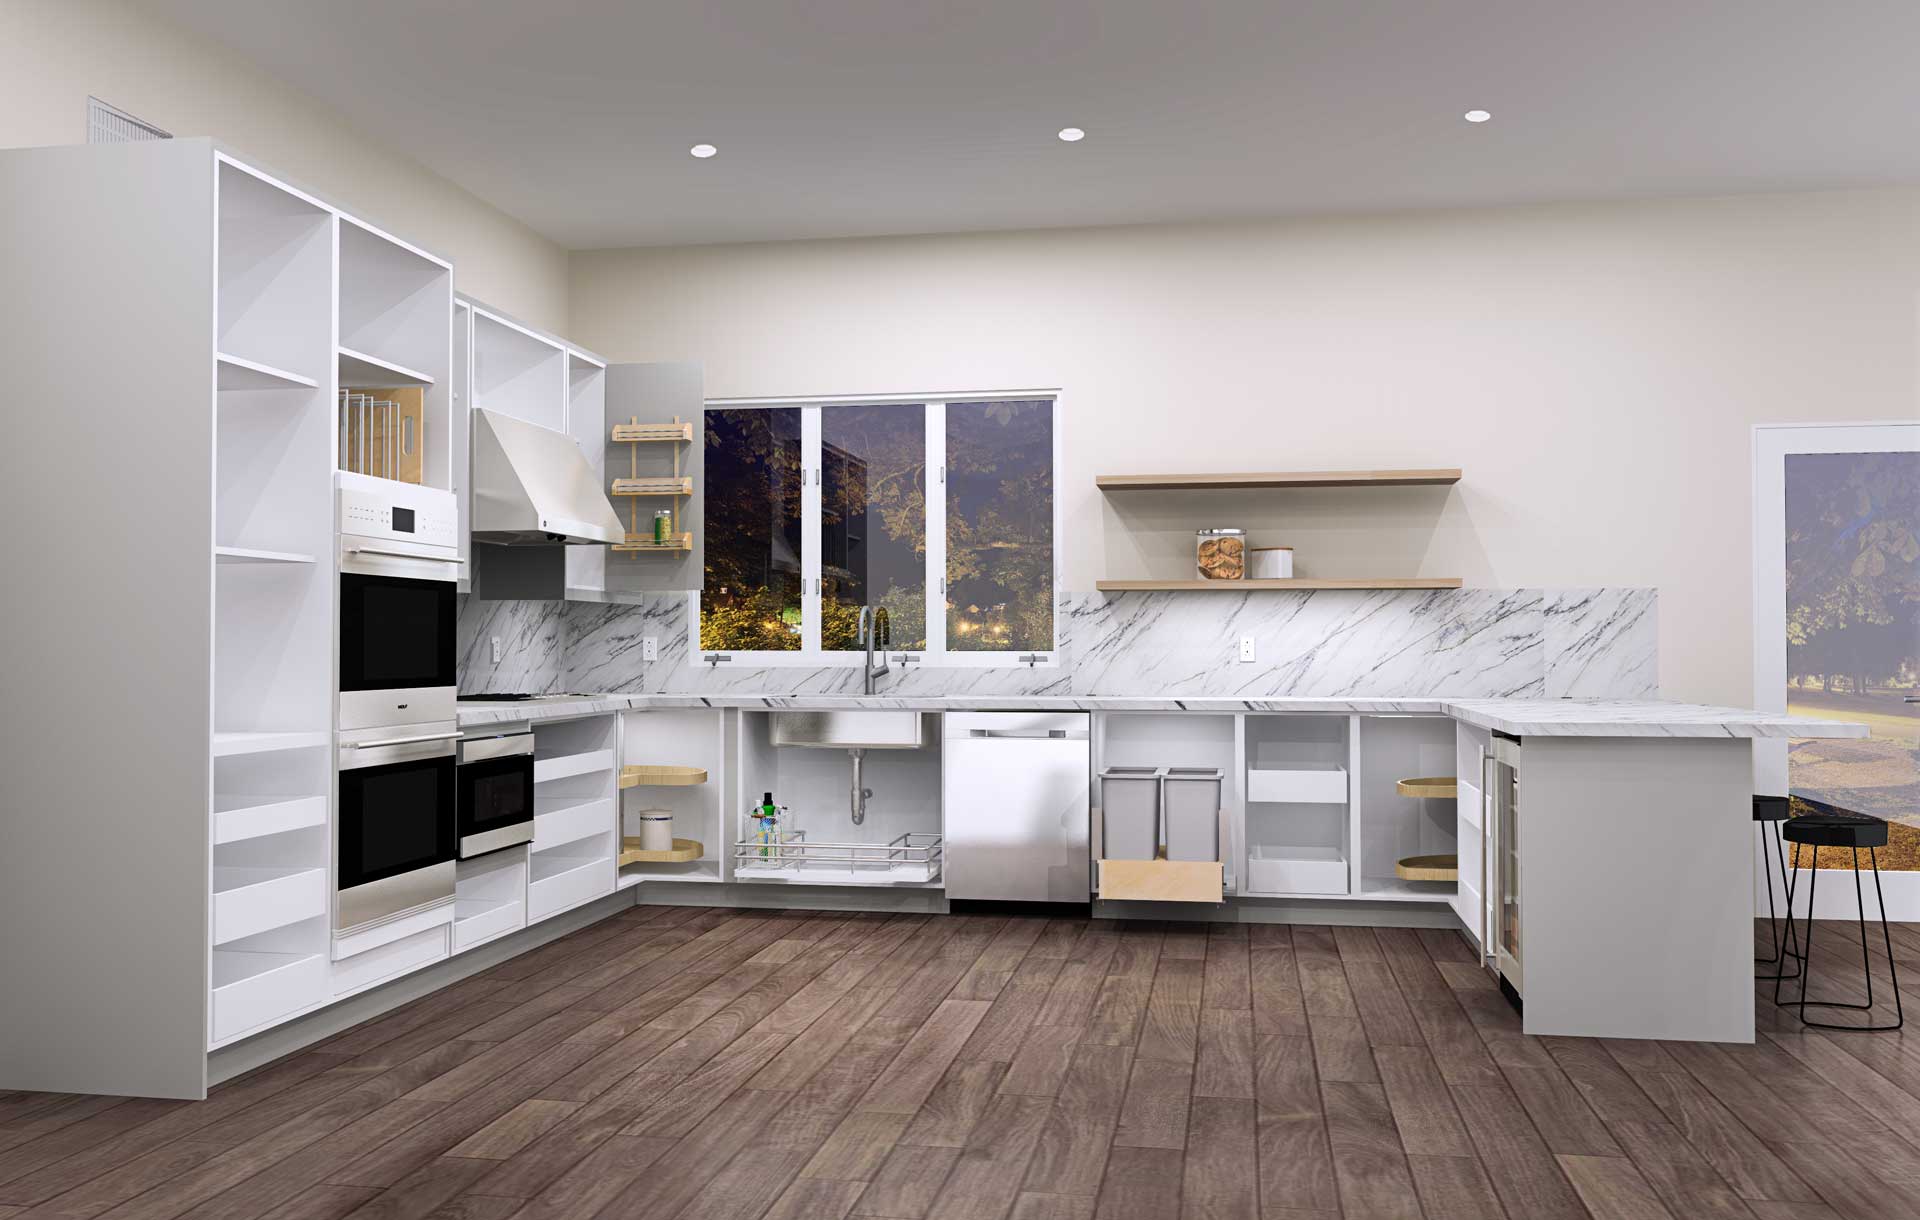 outsourced kitchen design showing internal organizers